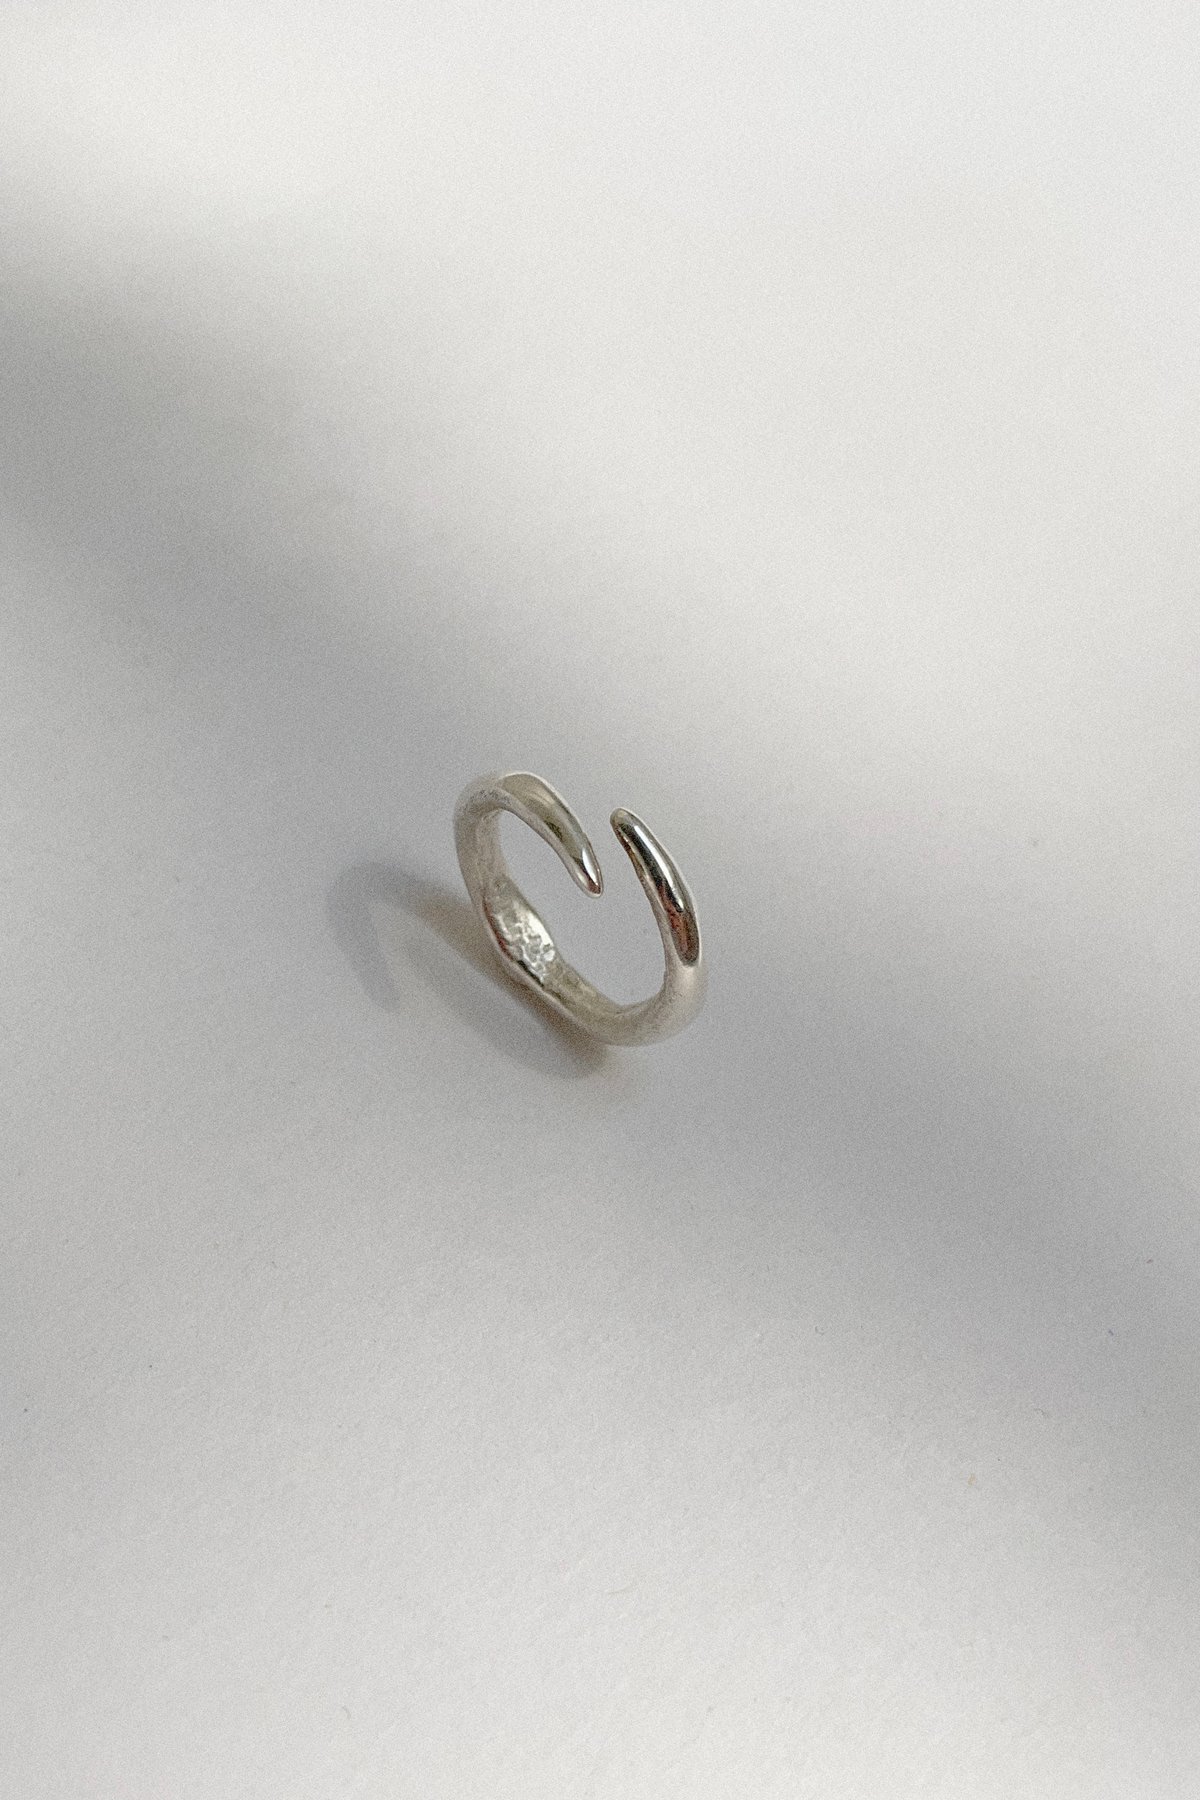 Image of Edition 4. Piece 5. Ring